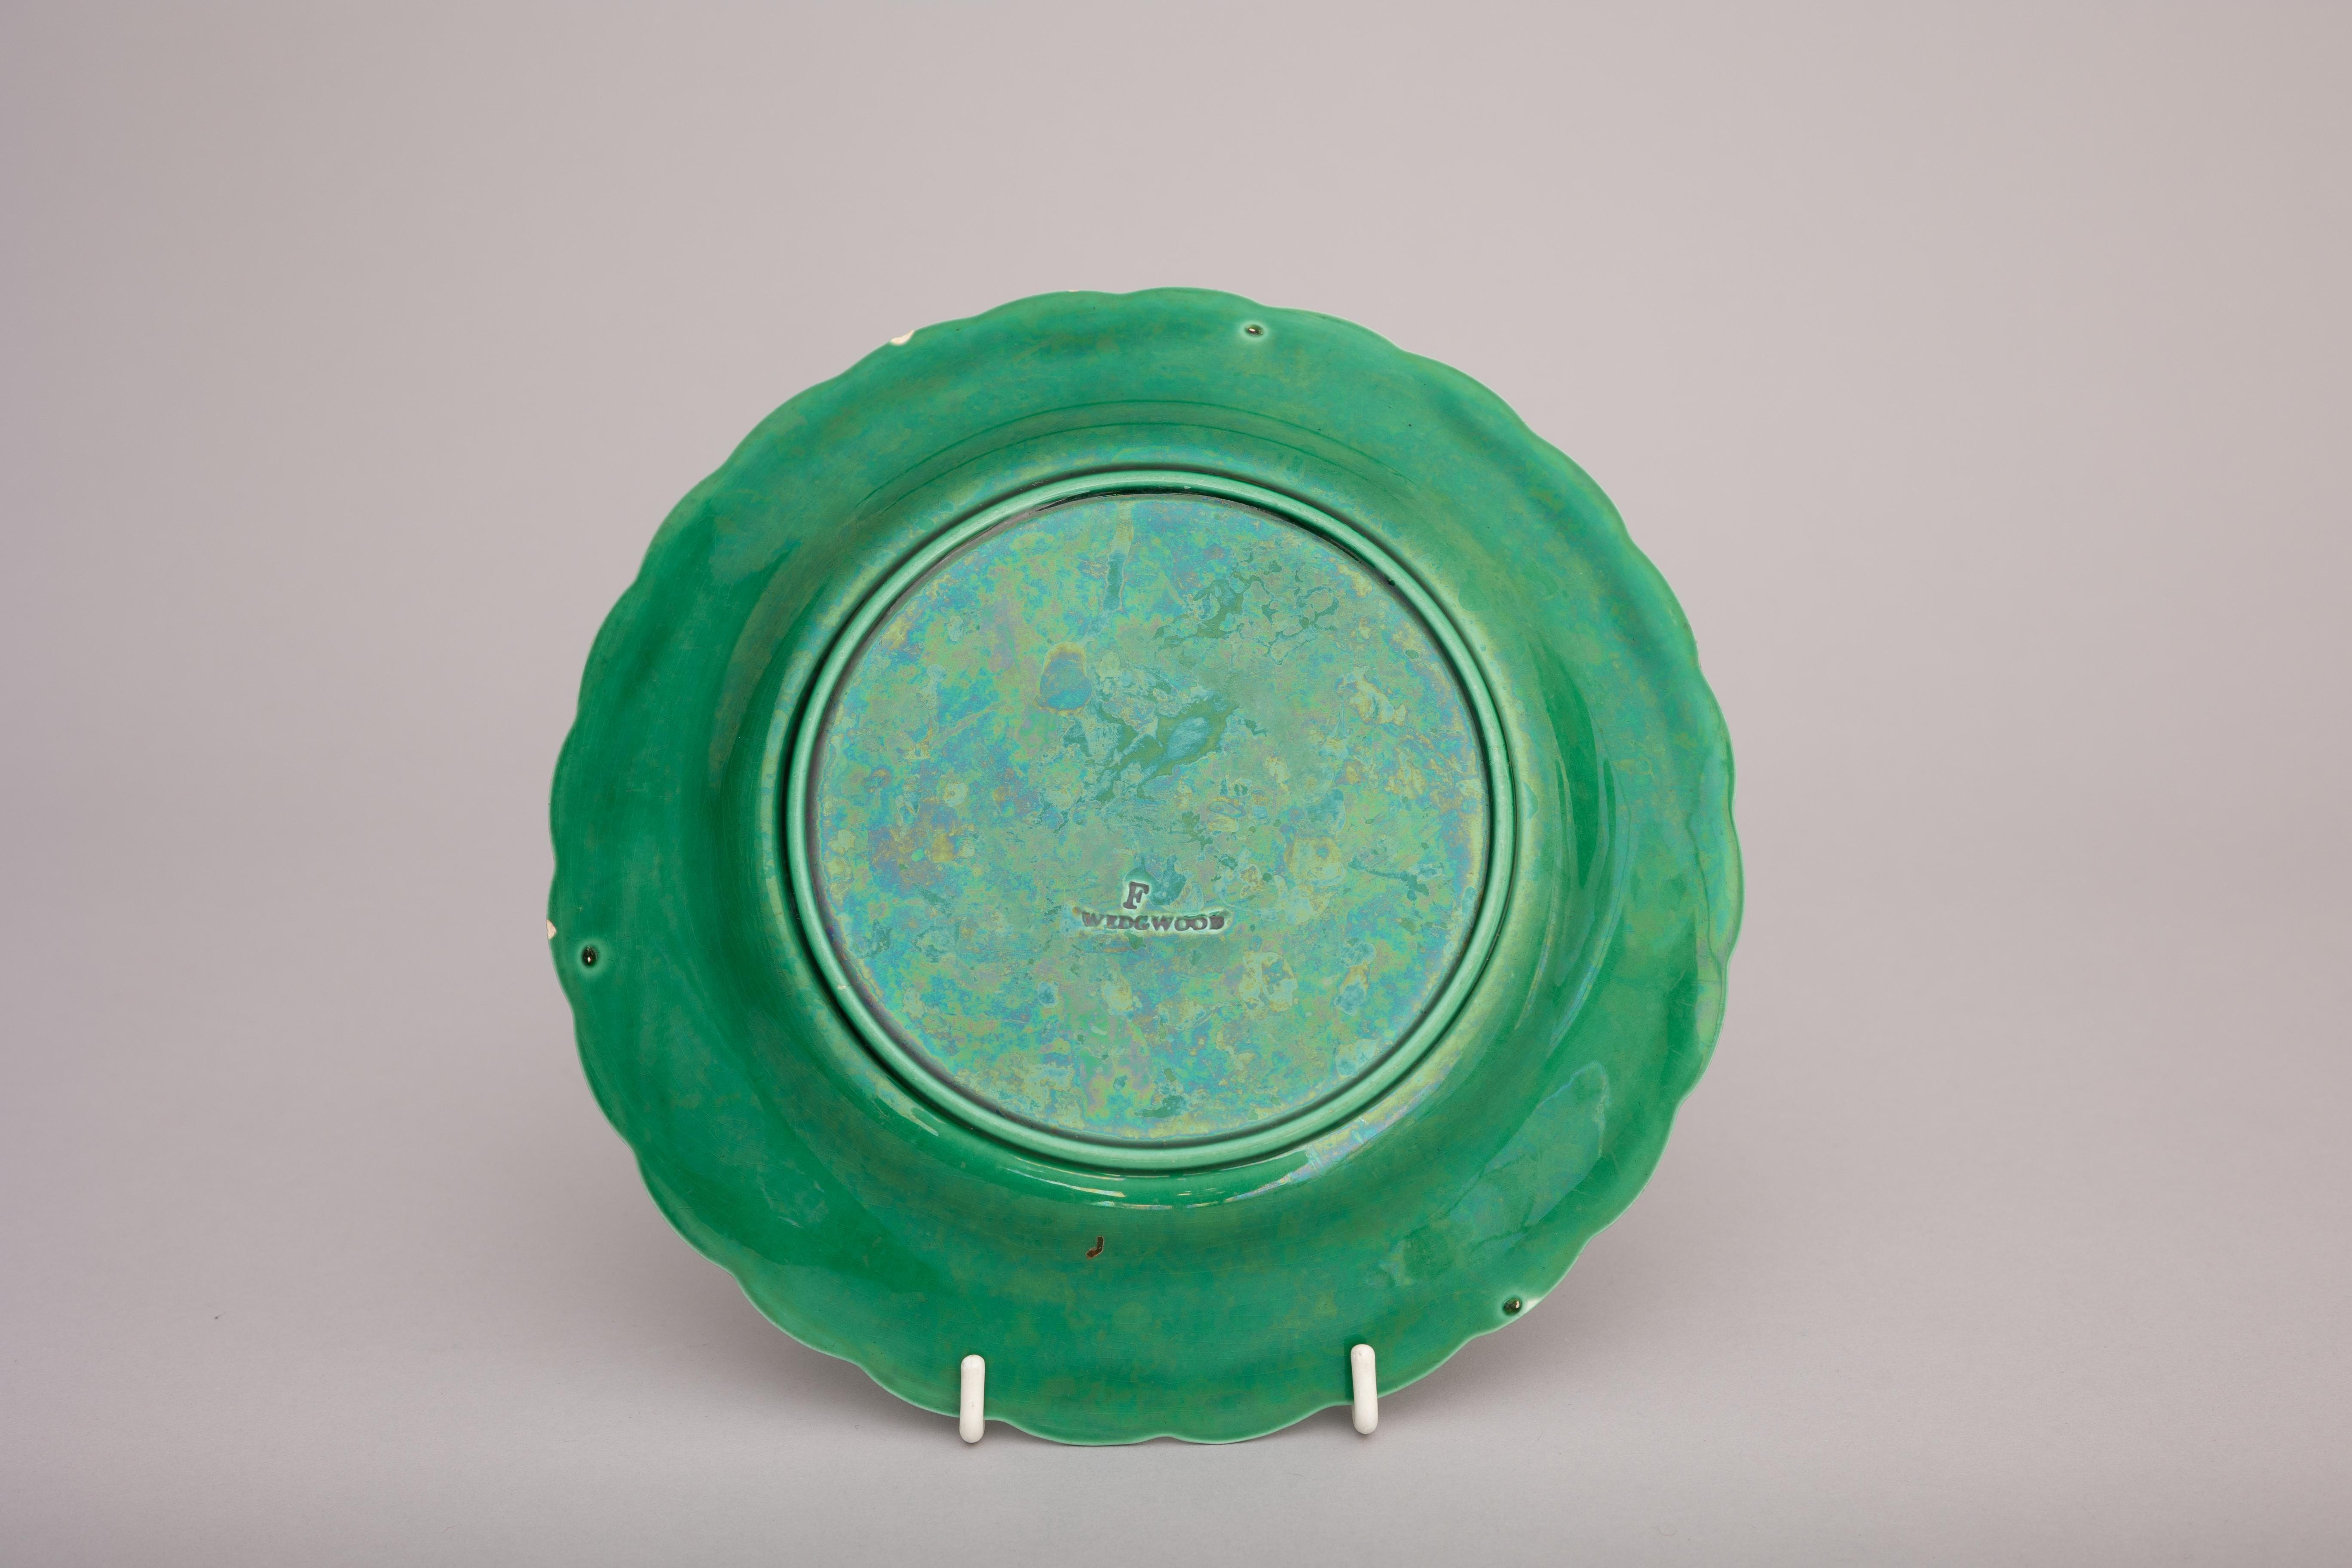 Aesthetic Movement Green Majolica Sunflower Plates by Wedgwood, circa 1880